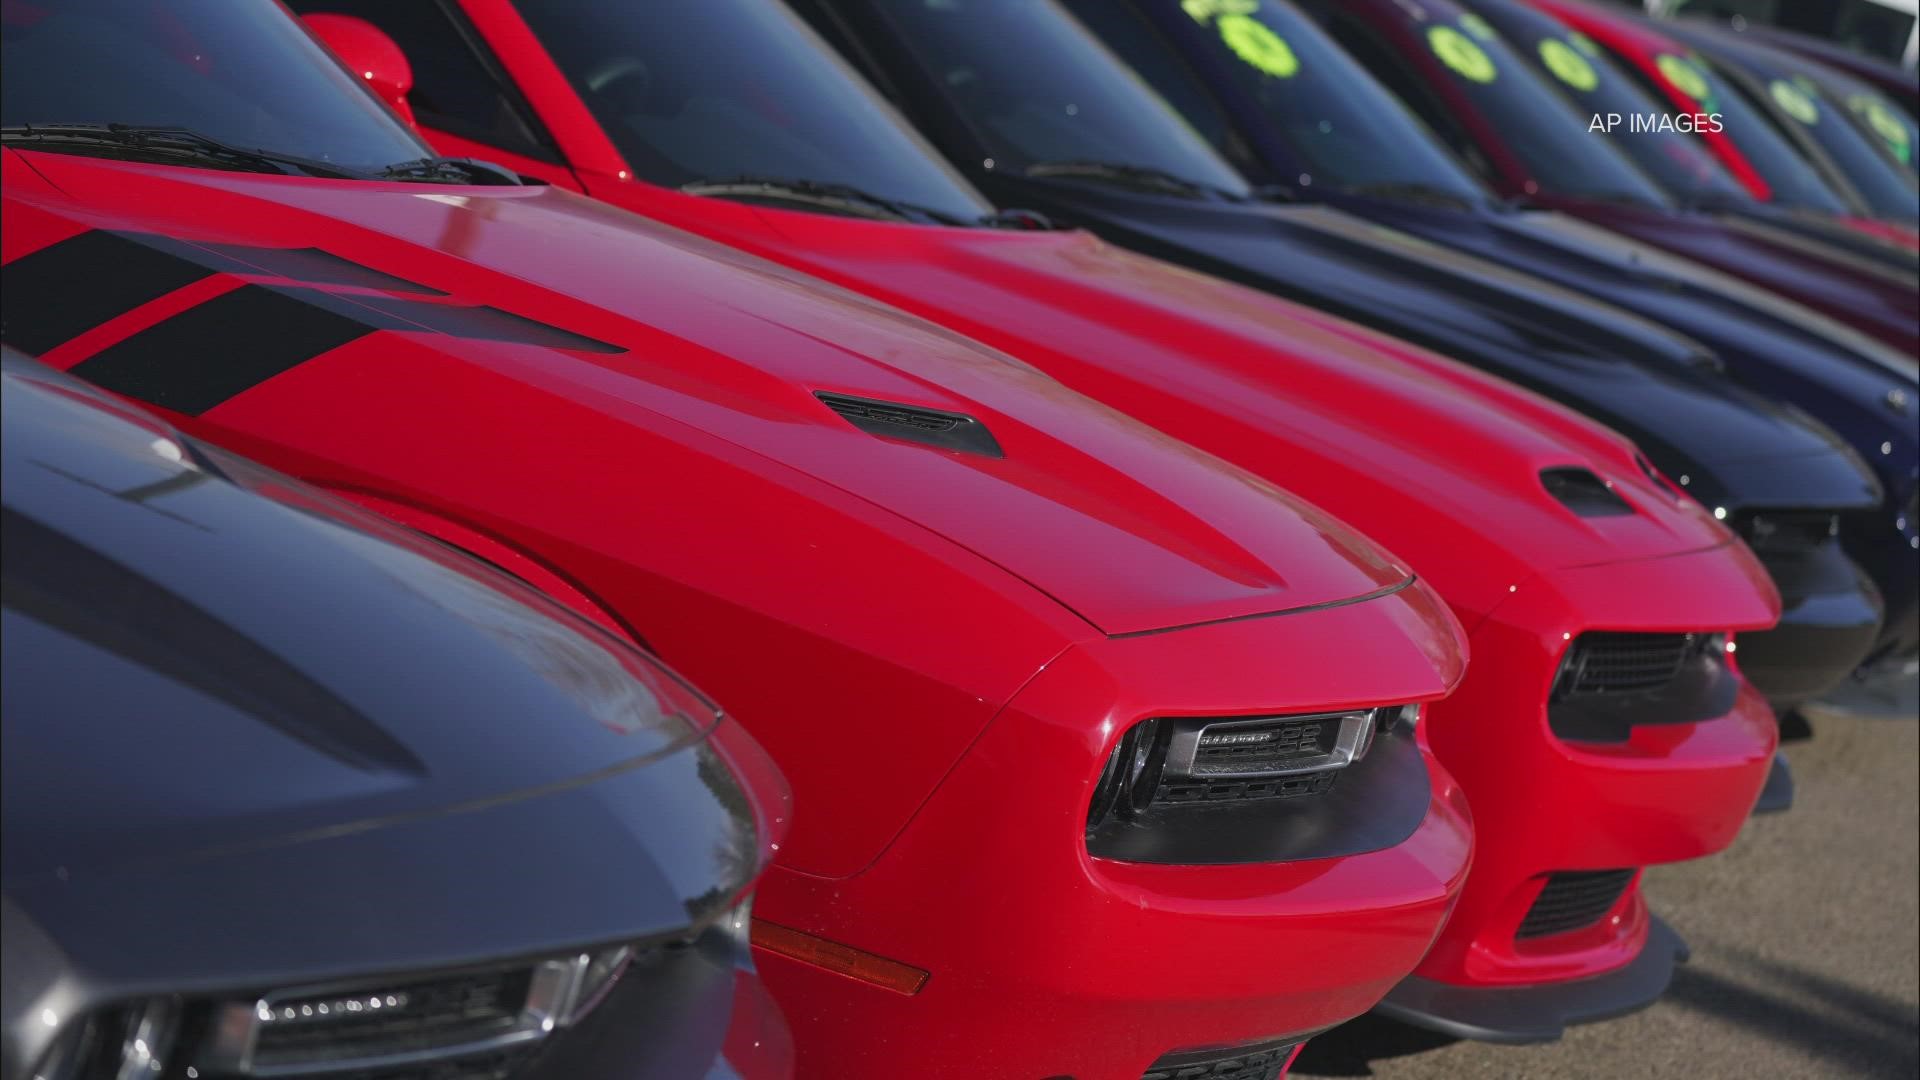 Dodge announced Monday its iconic muscle car will no longer be gas-powered. All 2023 Charger and Challenger models will bear a "Last Call" underhood plaque.